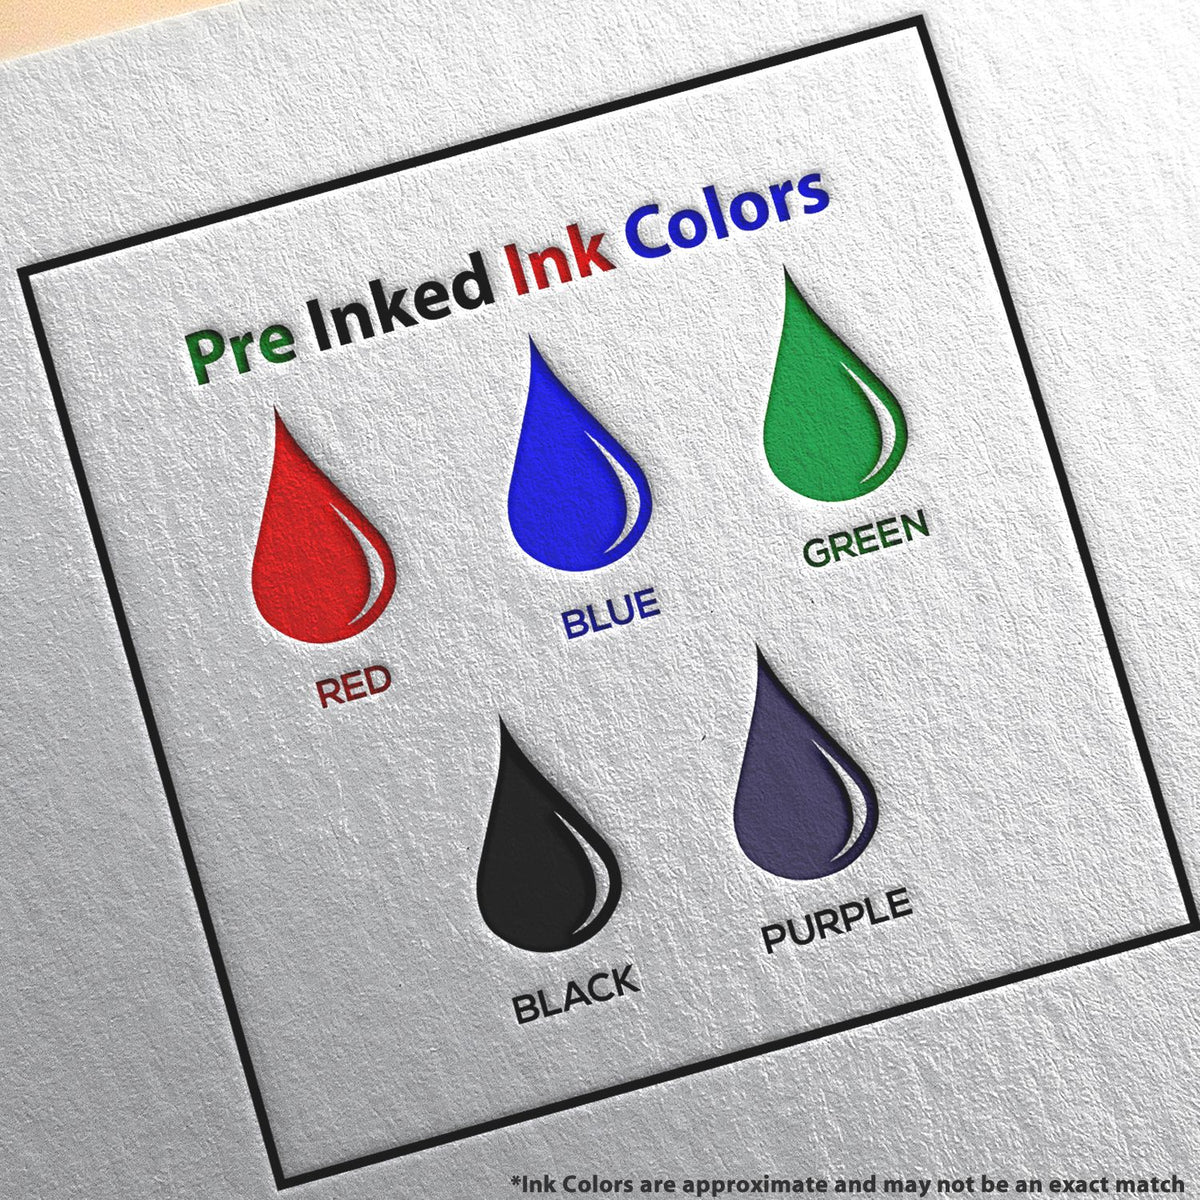 A picture showing the different ink colors or hues available for the Premium MaxLight Pre-Inked South Carolina Landscape Architectural Stamp product.